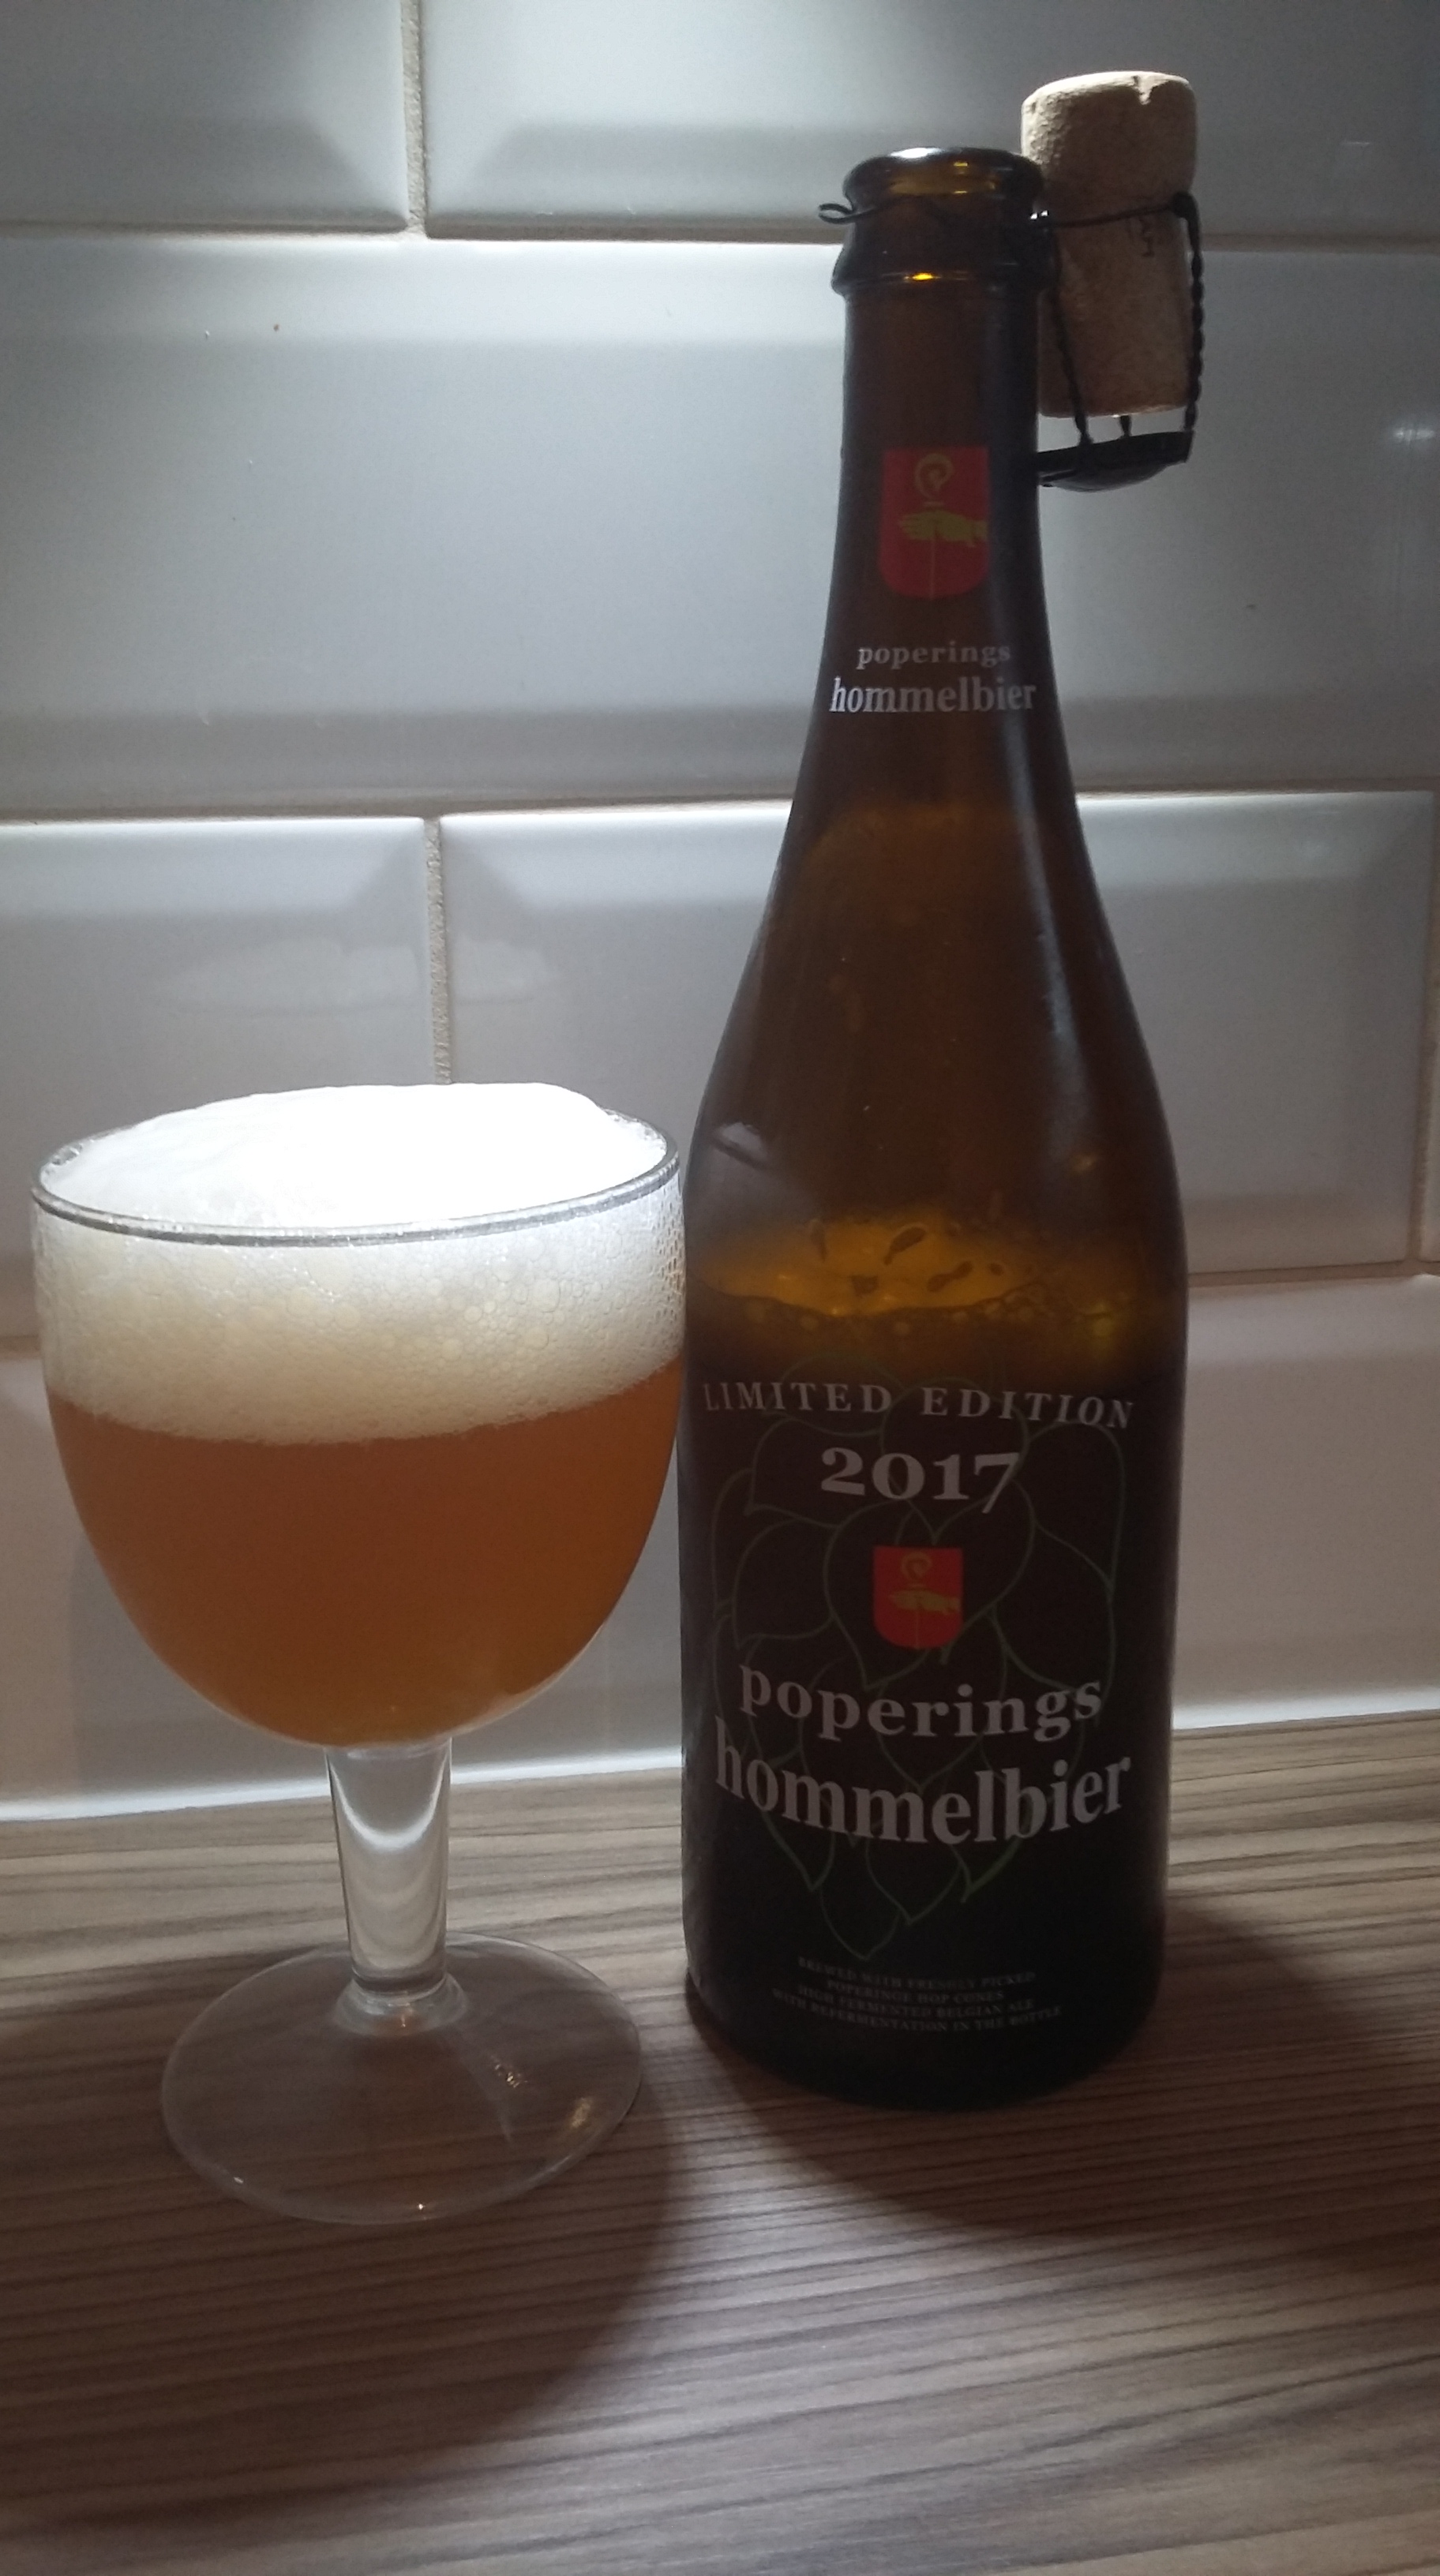 Hommelbier Limited Edition 2017